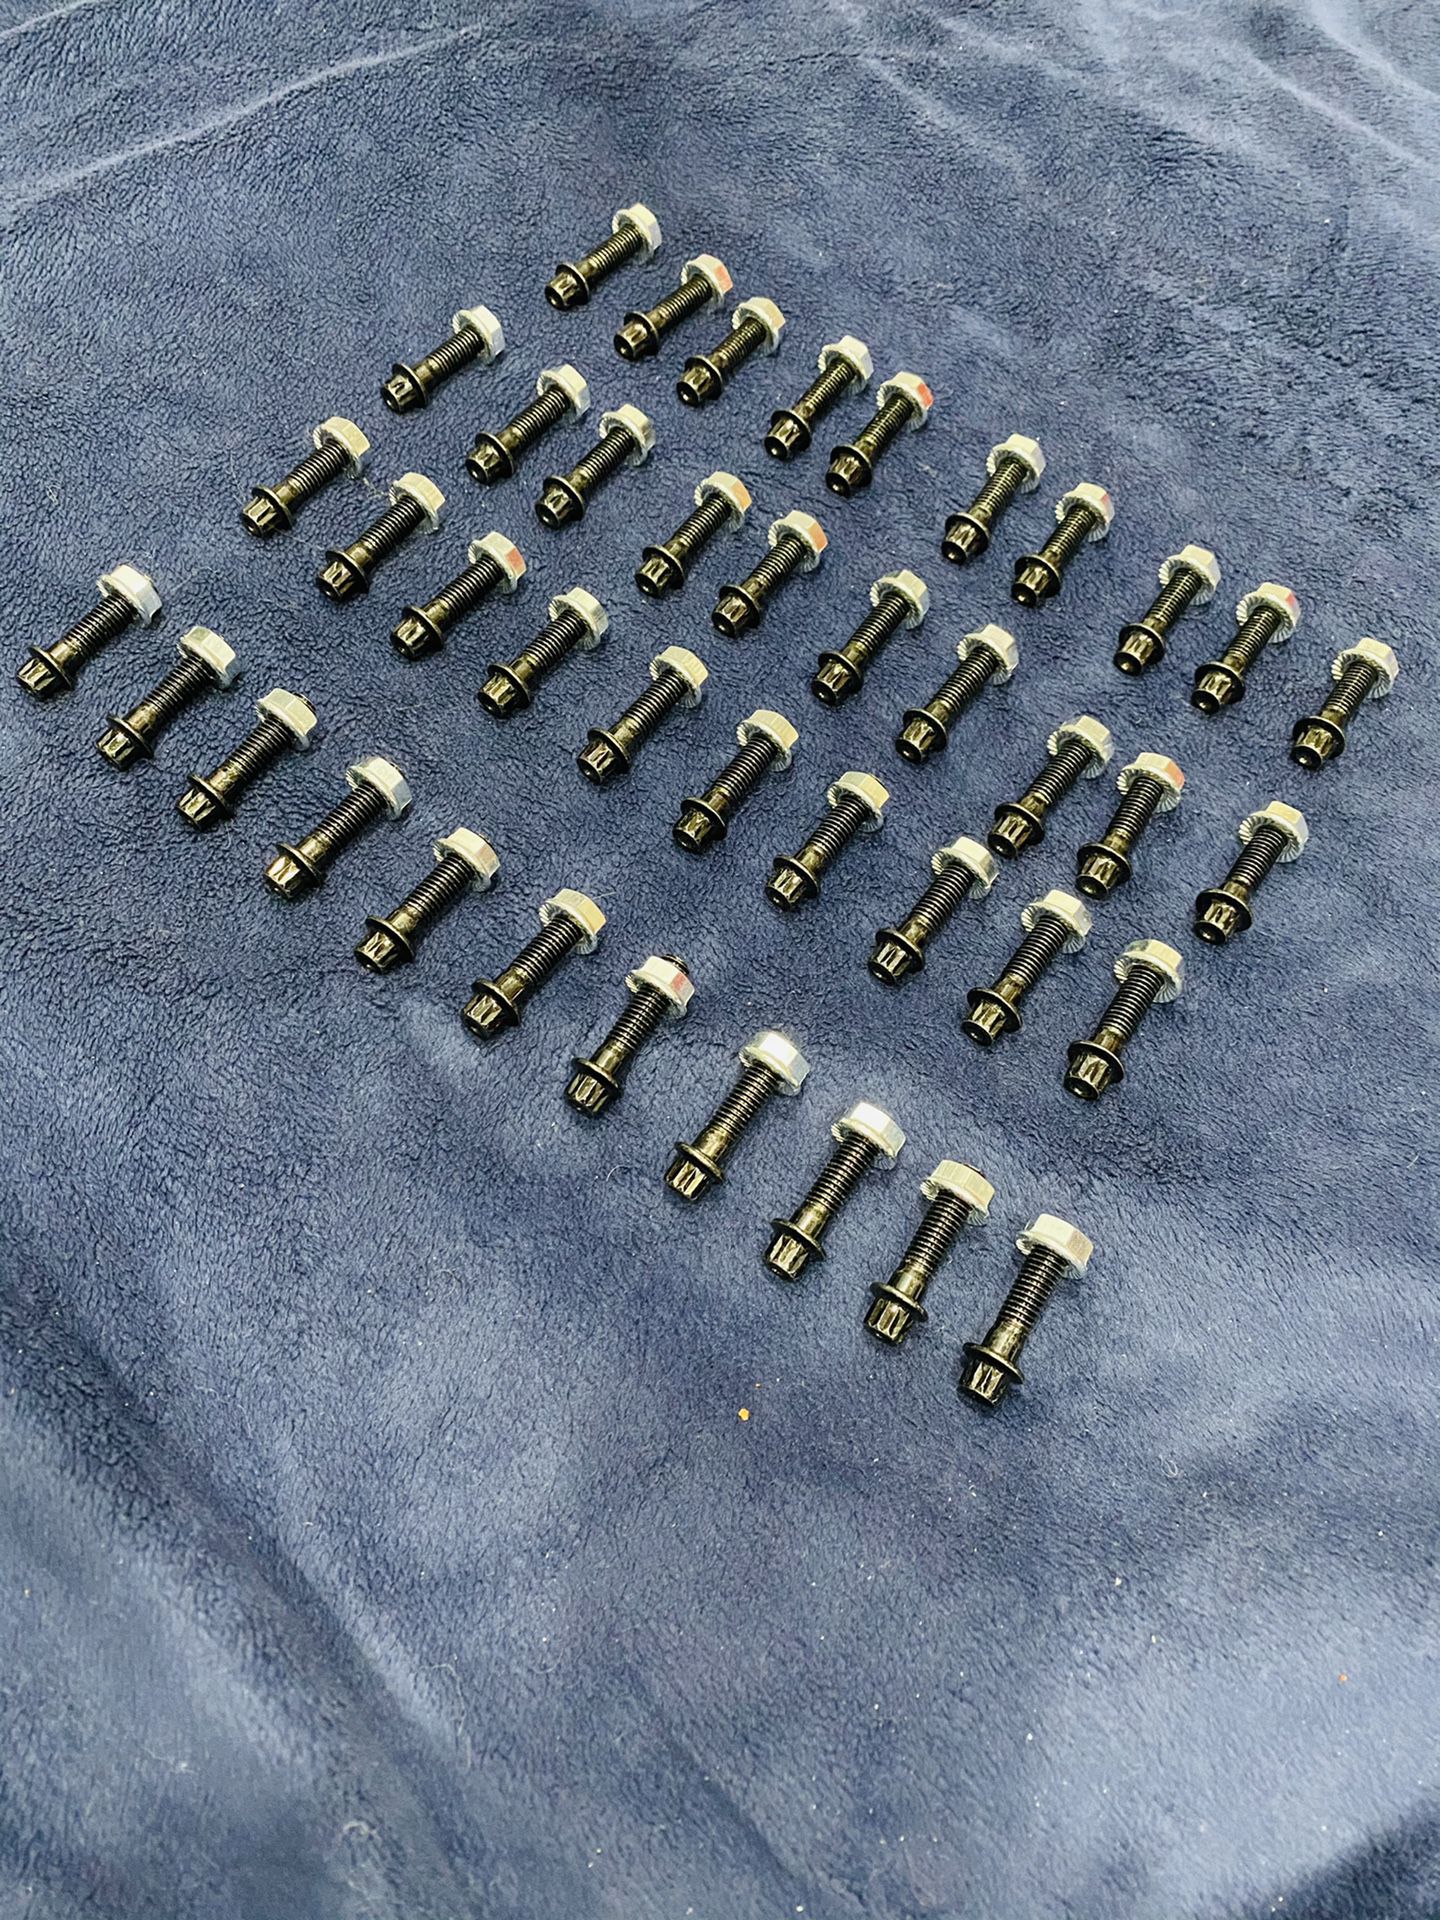 (40) 3 piece rim bolts 12point 8mx1.25 32mm gold black or chrome includes the nuts